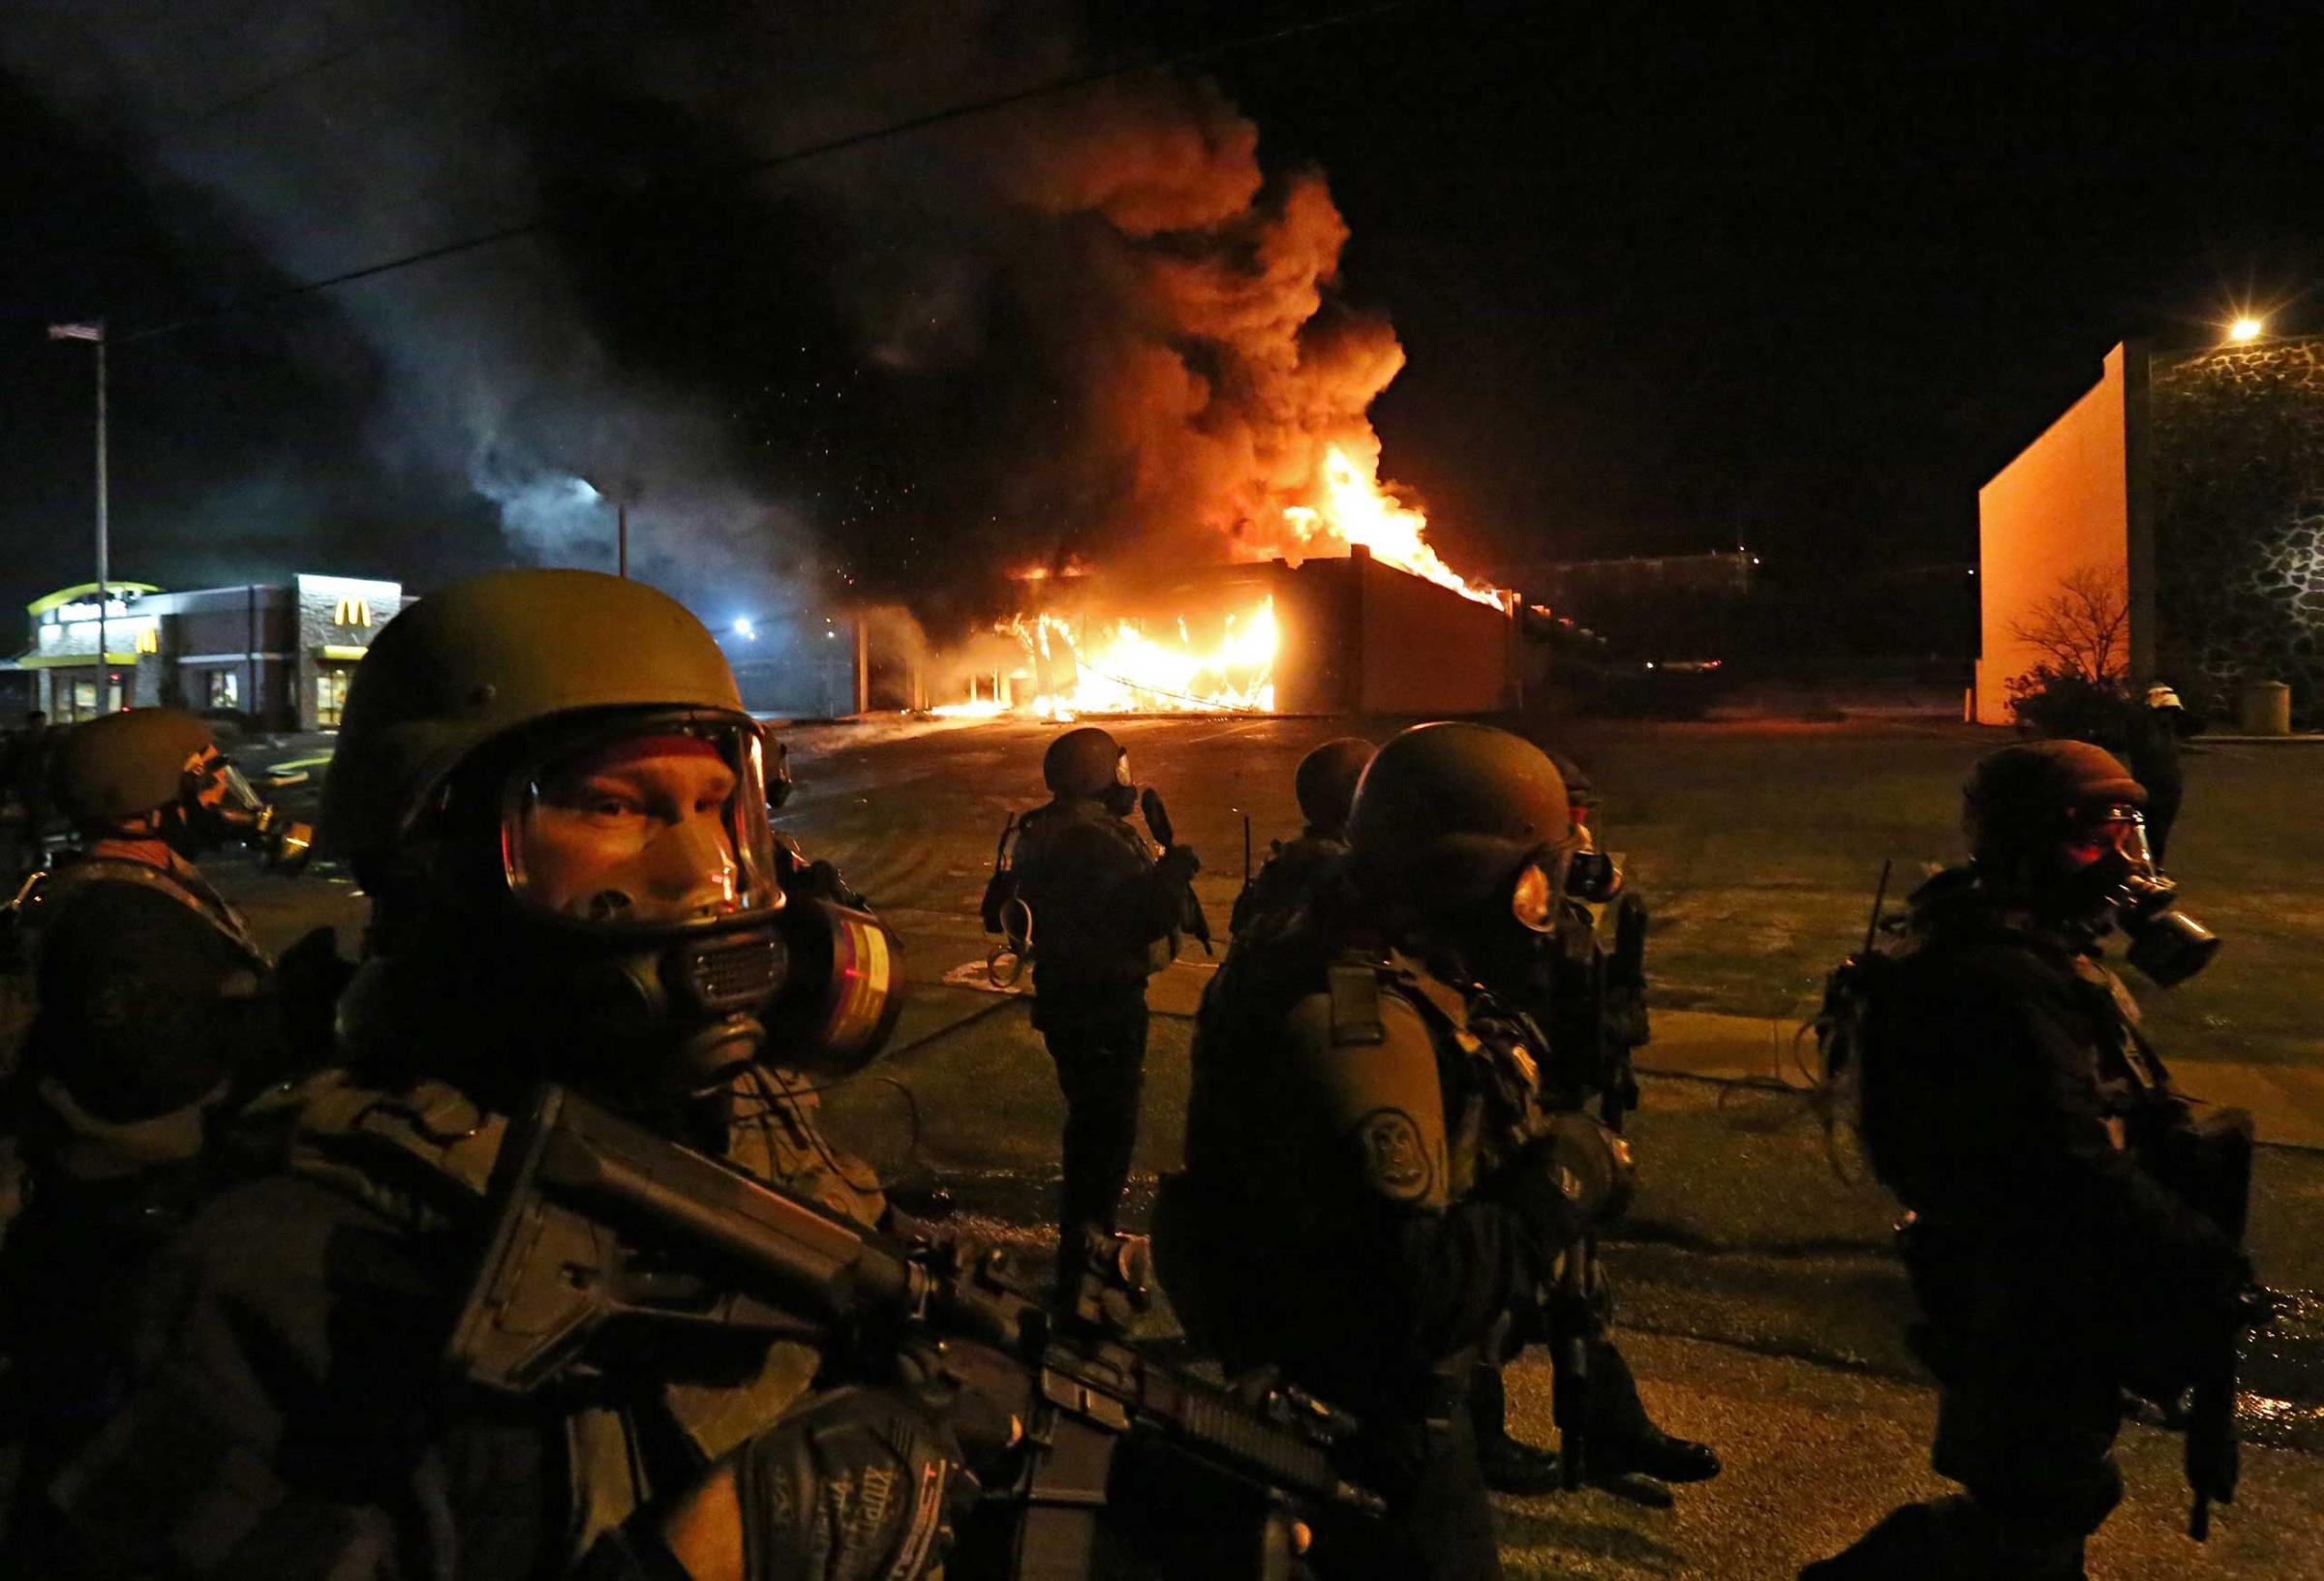 Embedded with Ferguson police during protest